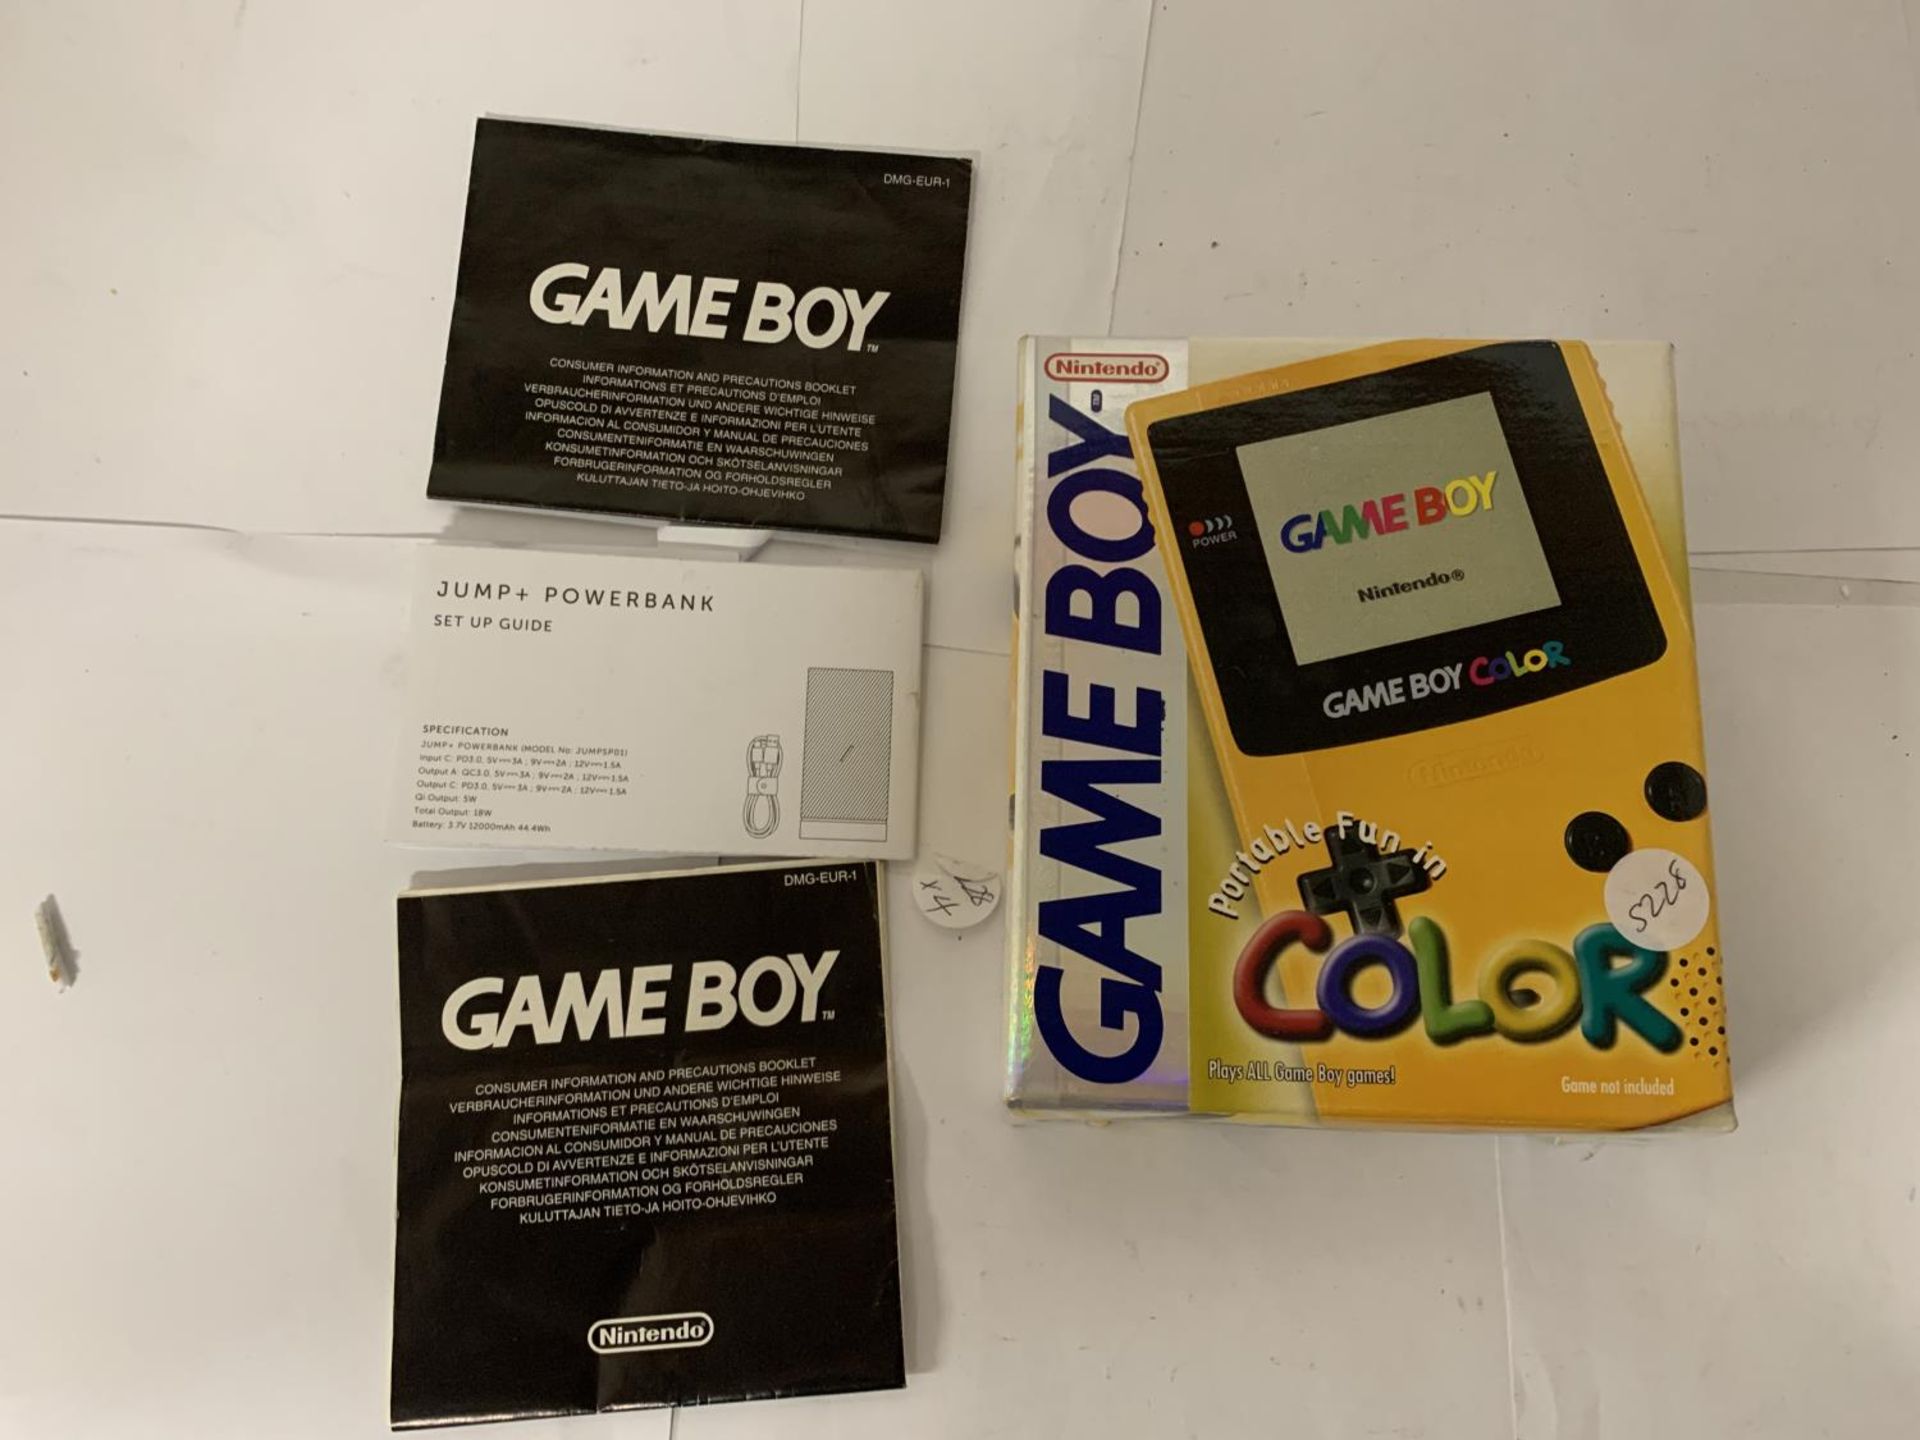 A BOXED GAMEBOY COLOR PORTABLE HANDHELD